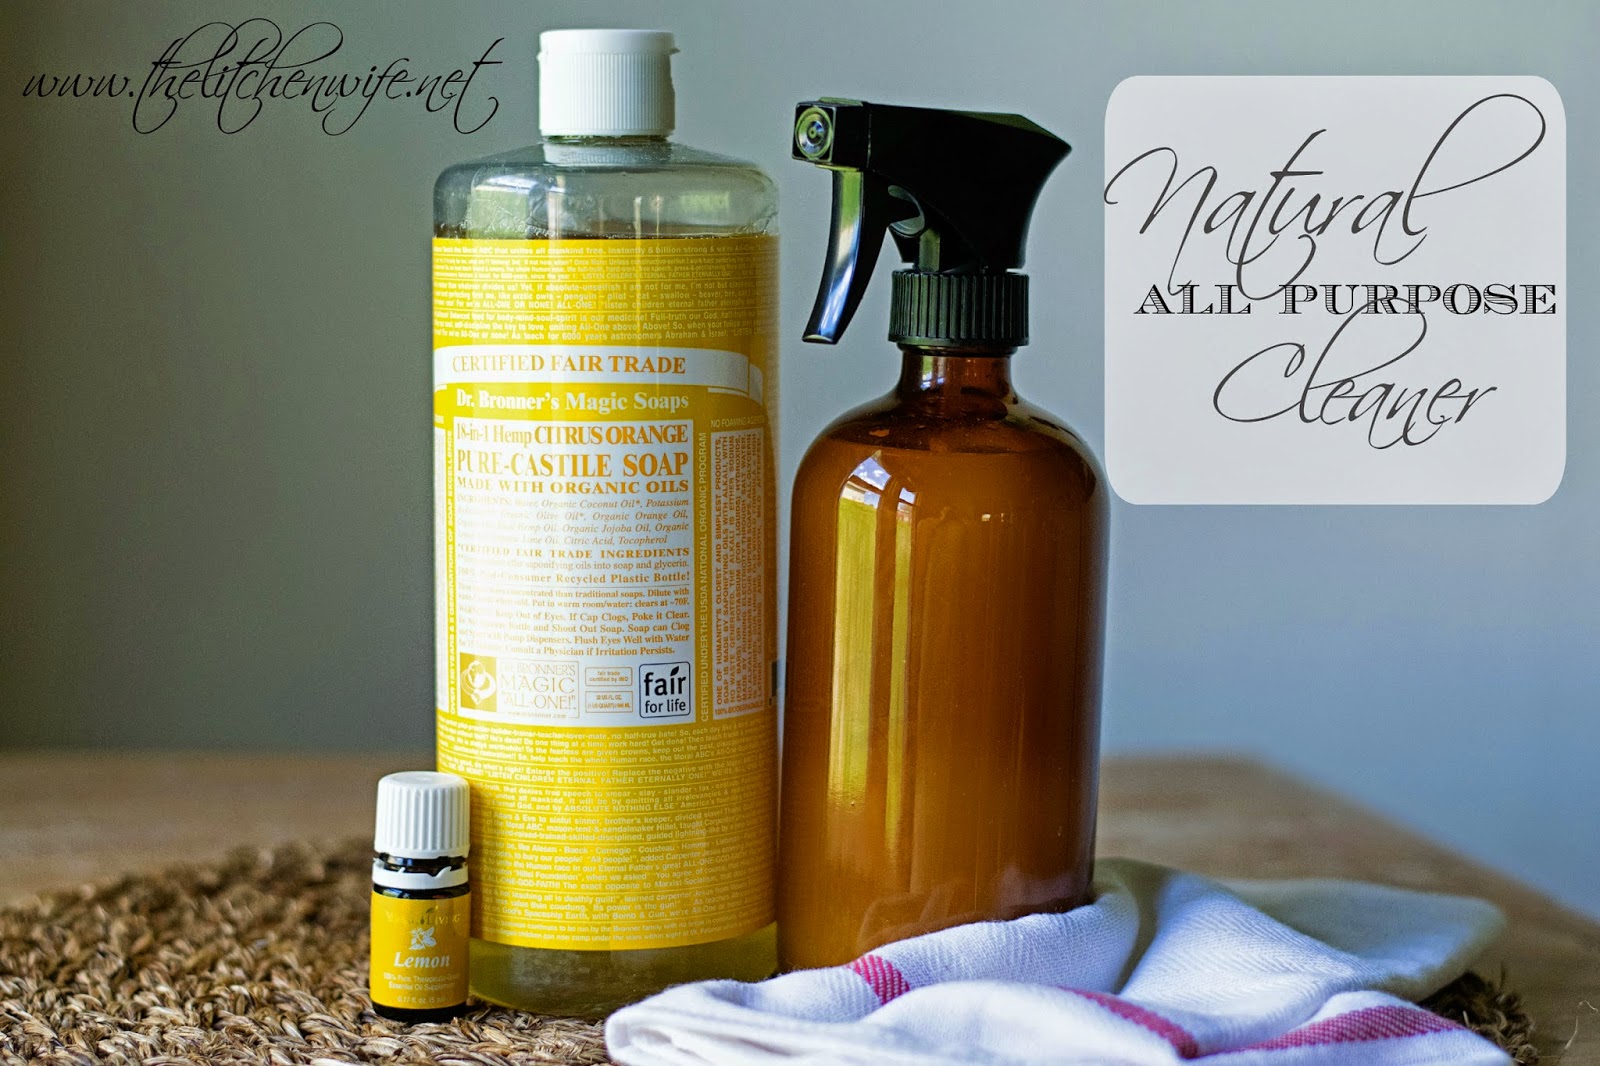 All Natural Foaming Cleaner